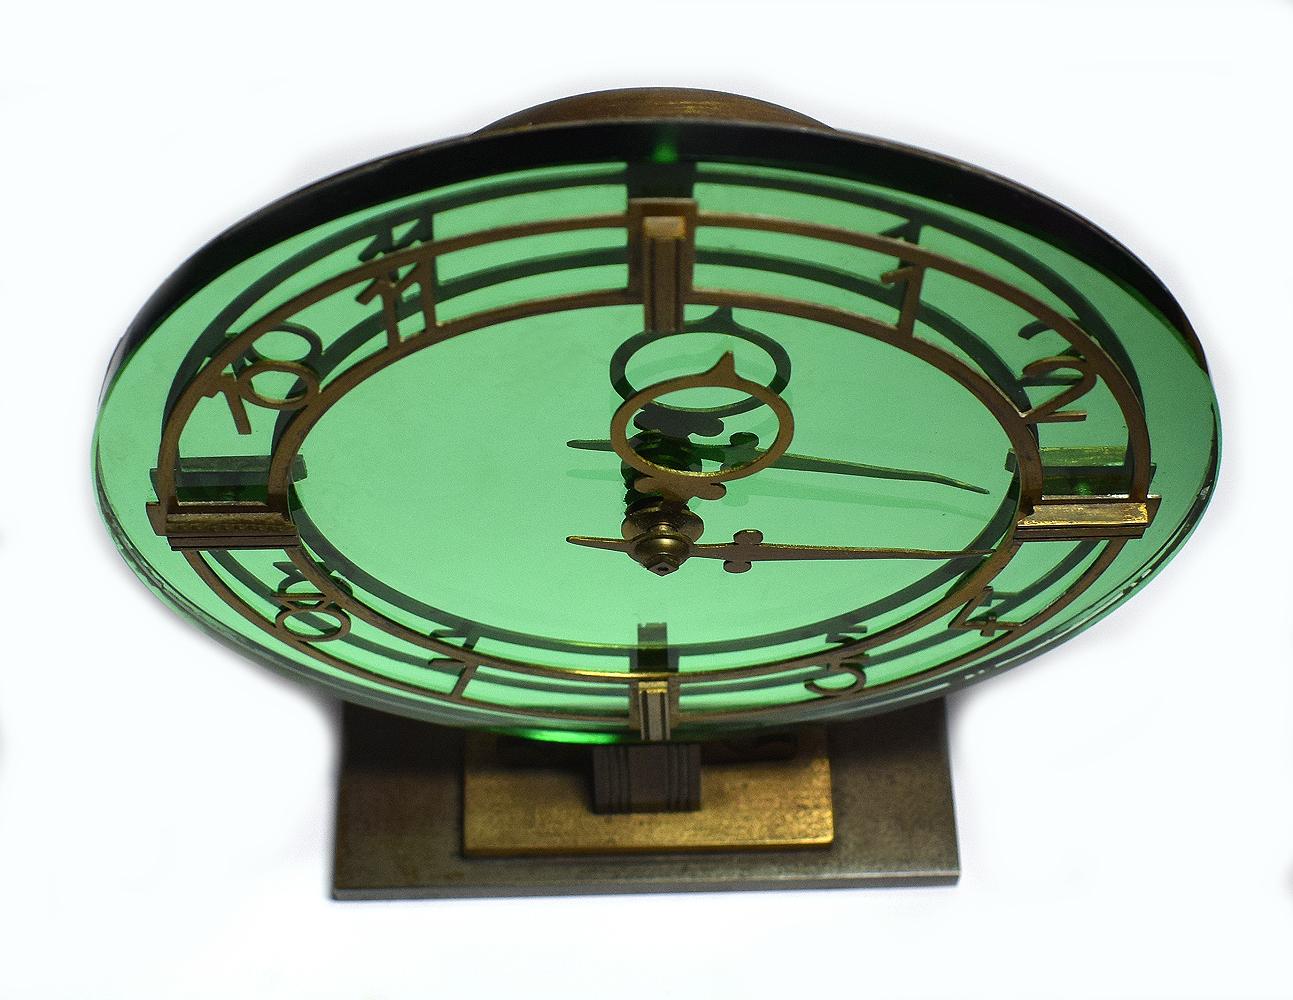 Very attractive SEC Smiths Art Deco modernist English clock. Made in England. Green mirrored background, very glamorous and finished off beautifully with a brass numerals. The dial sits on a solid brass stepped plinth. Good working order having been